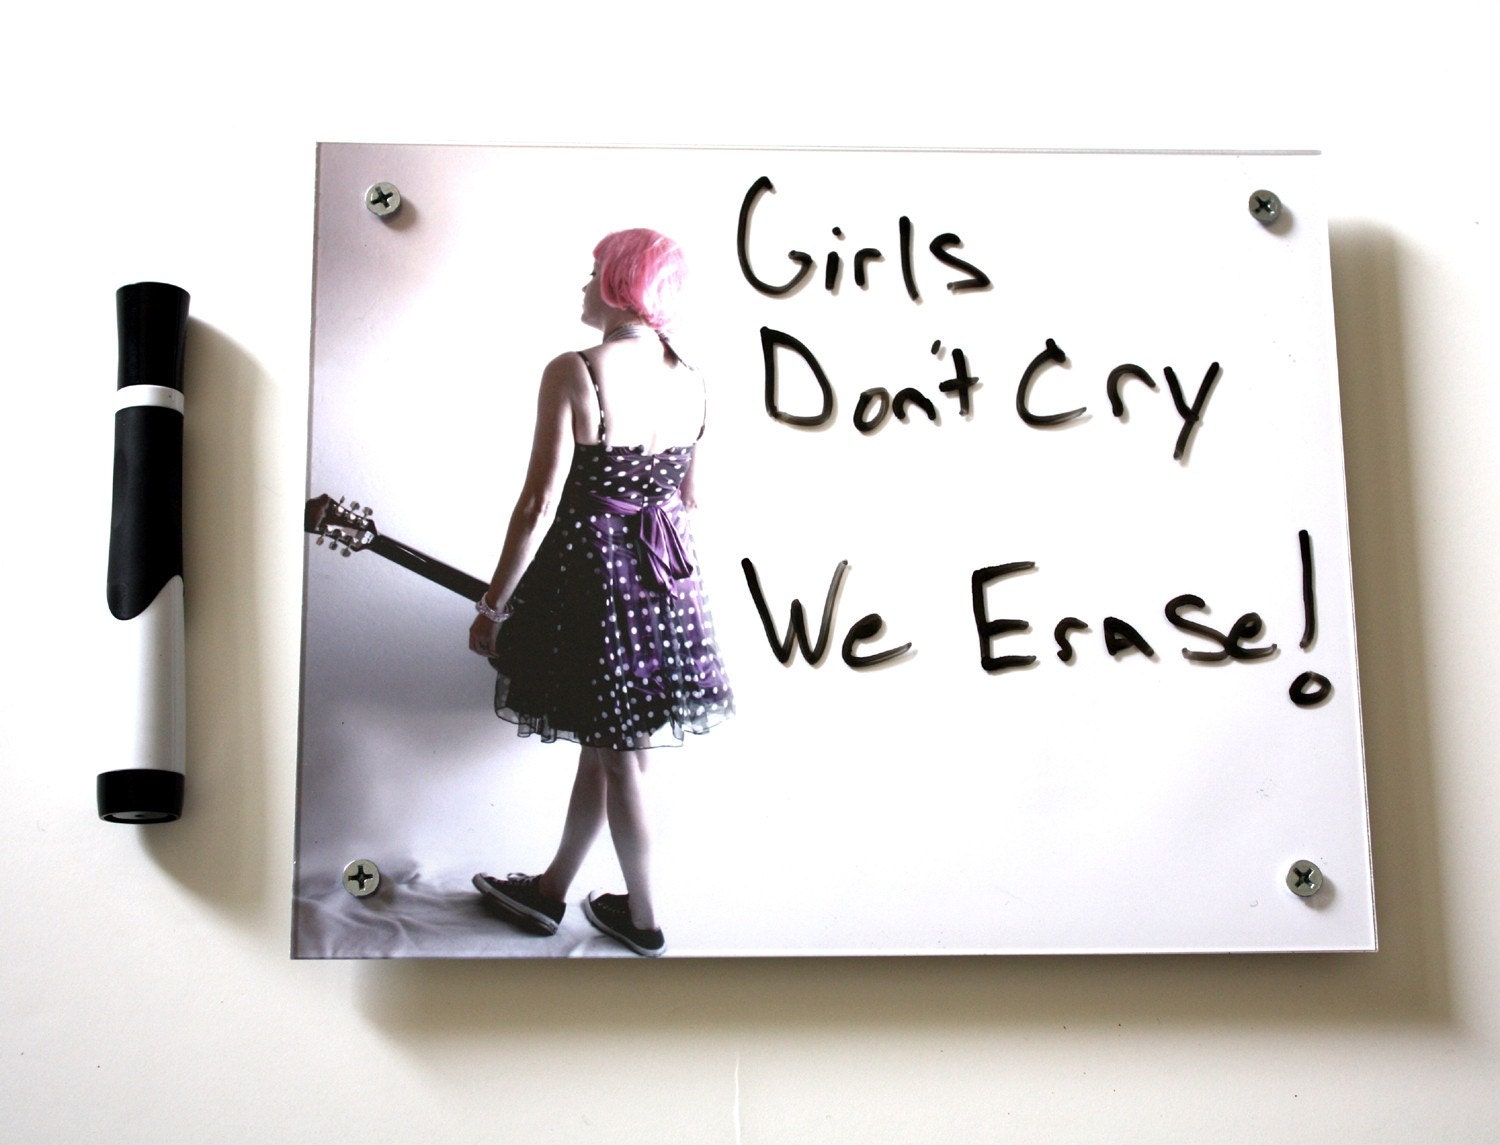 Girls Dont Cry White Board: Dry Erase Board Art - blueorder